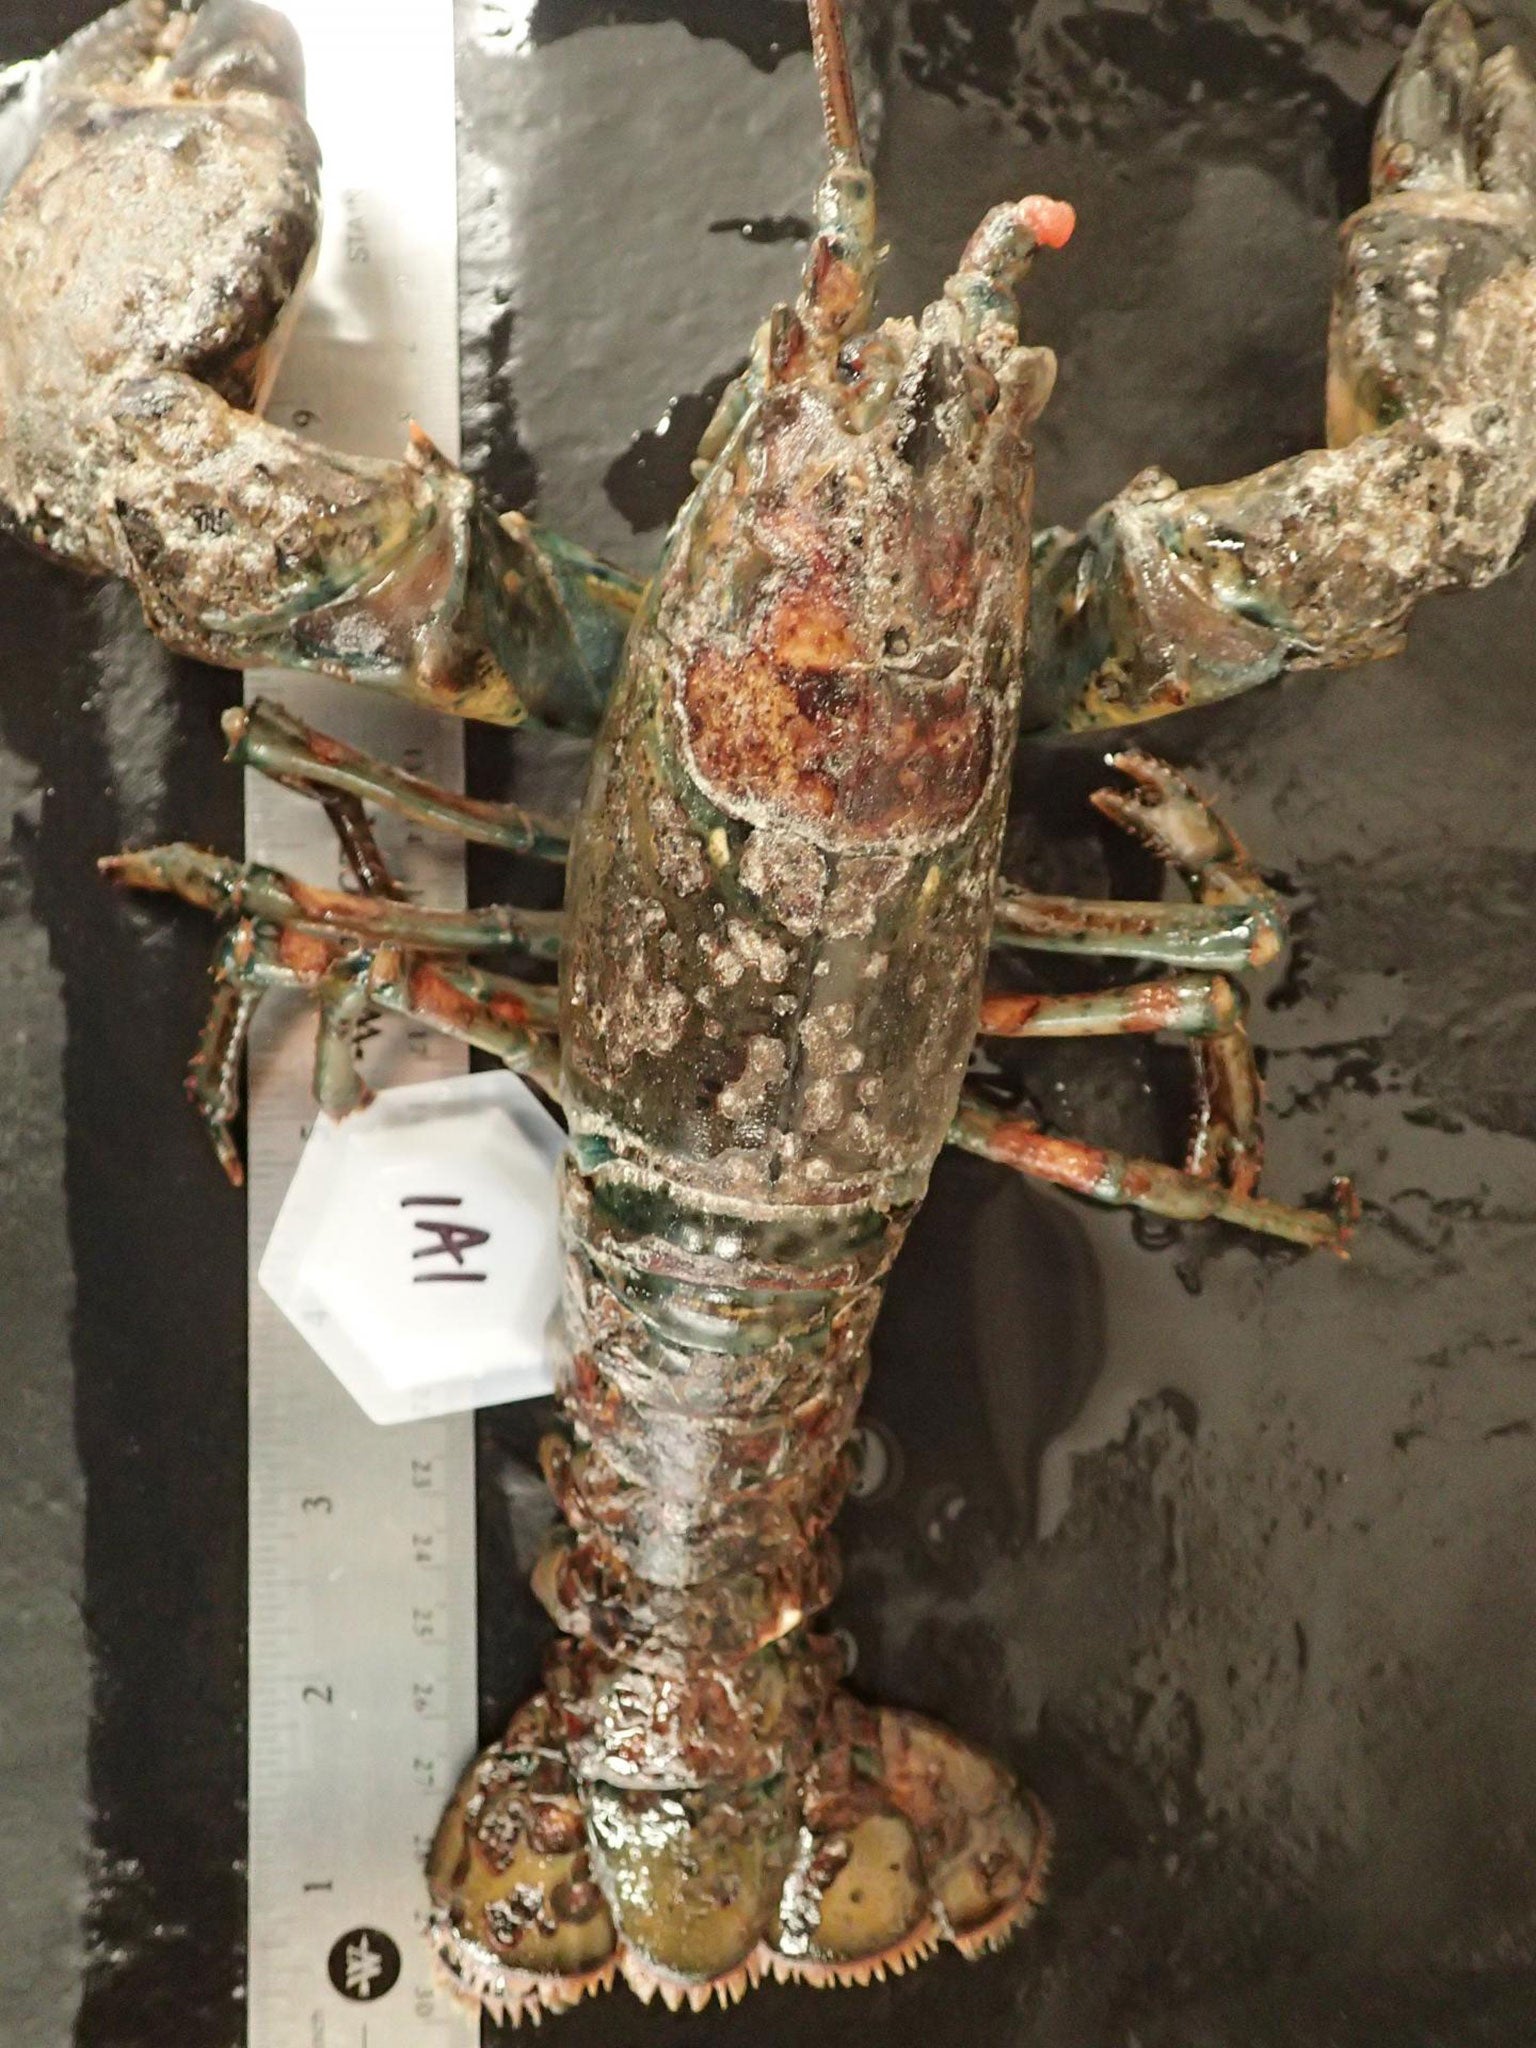 A lobster severely infected with epizootic shell disease